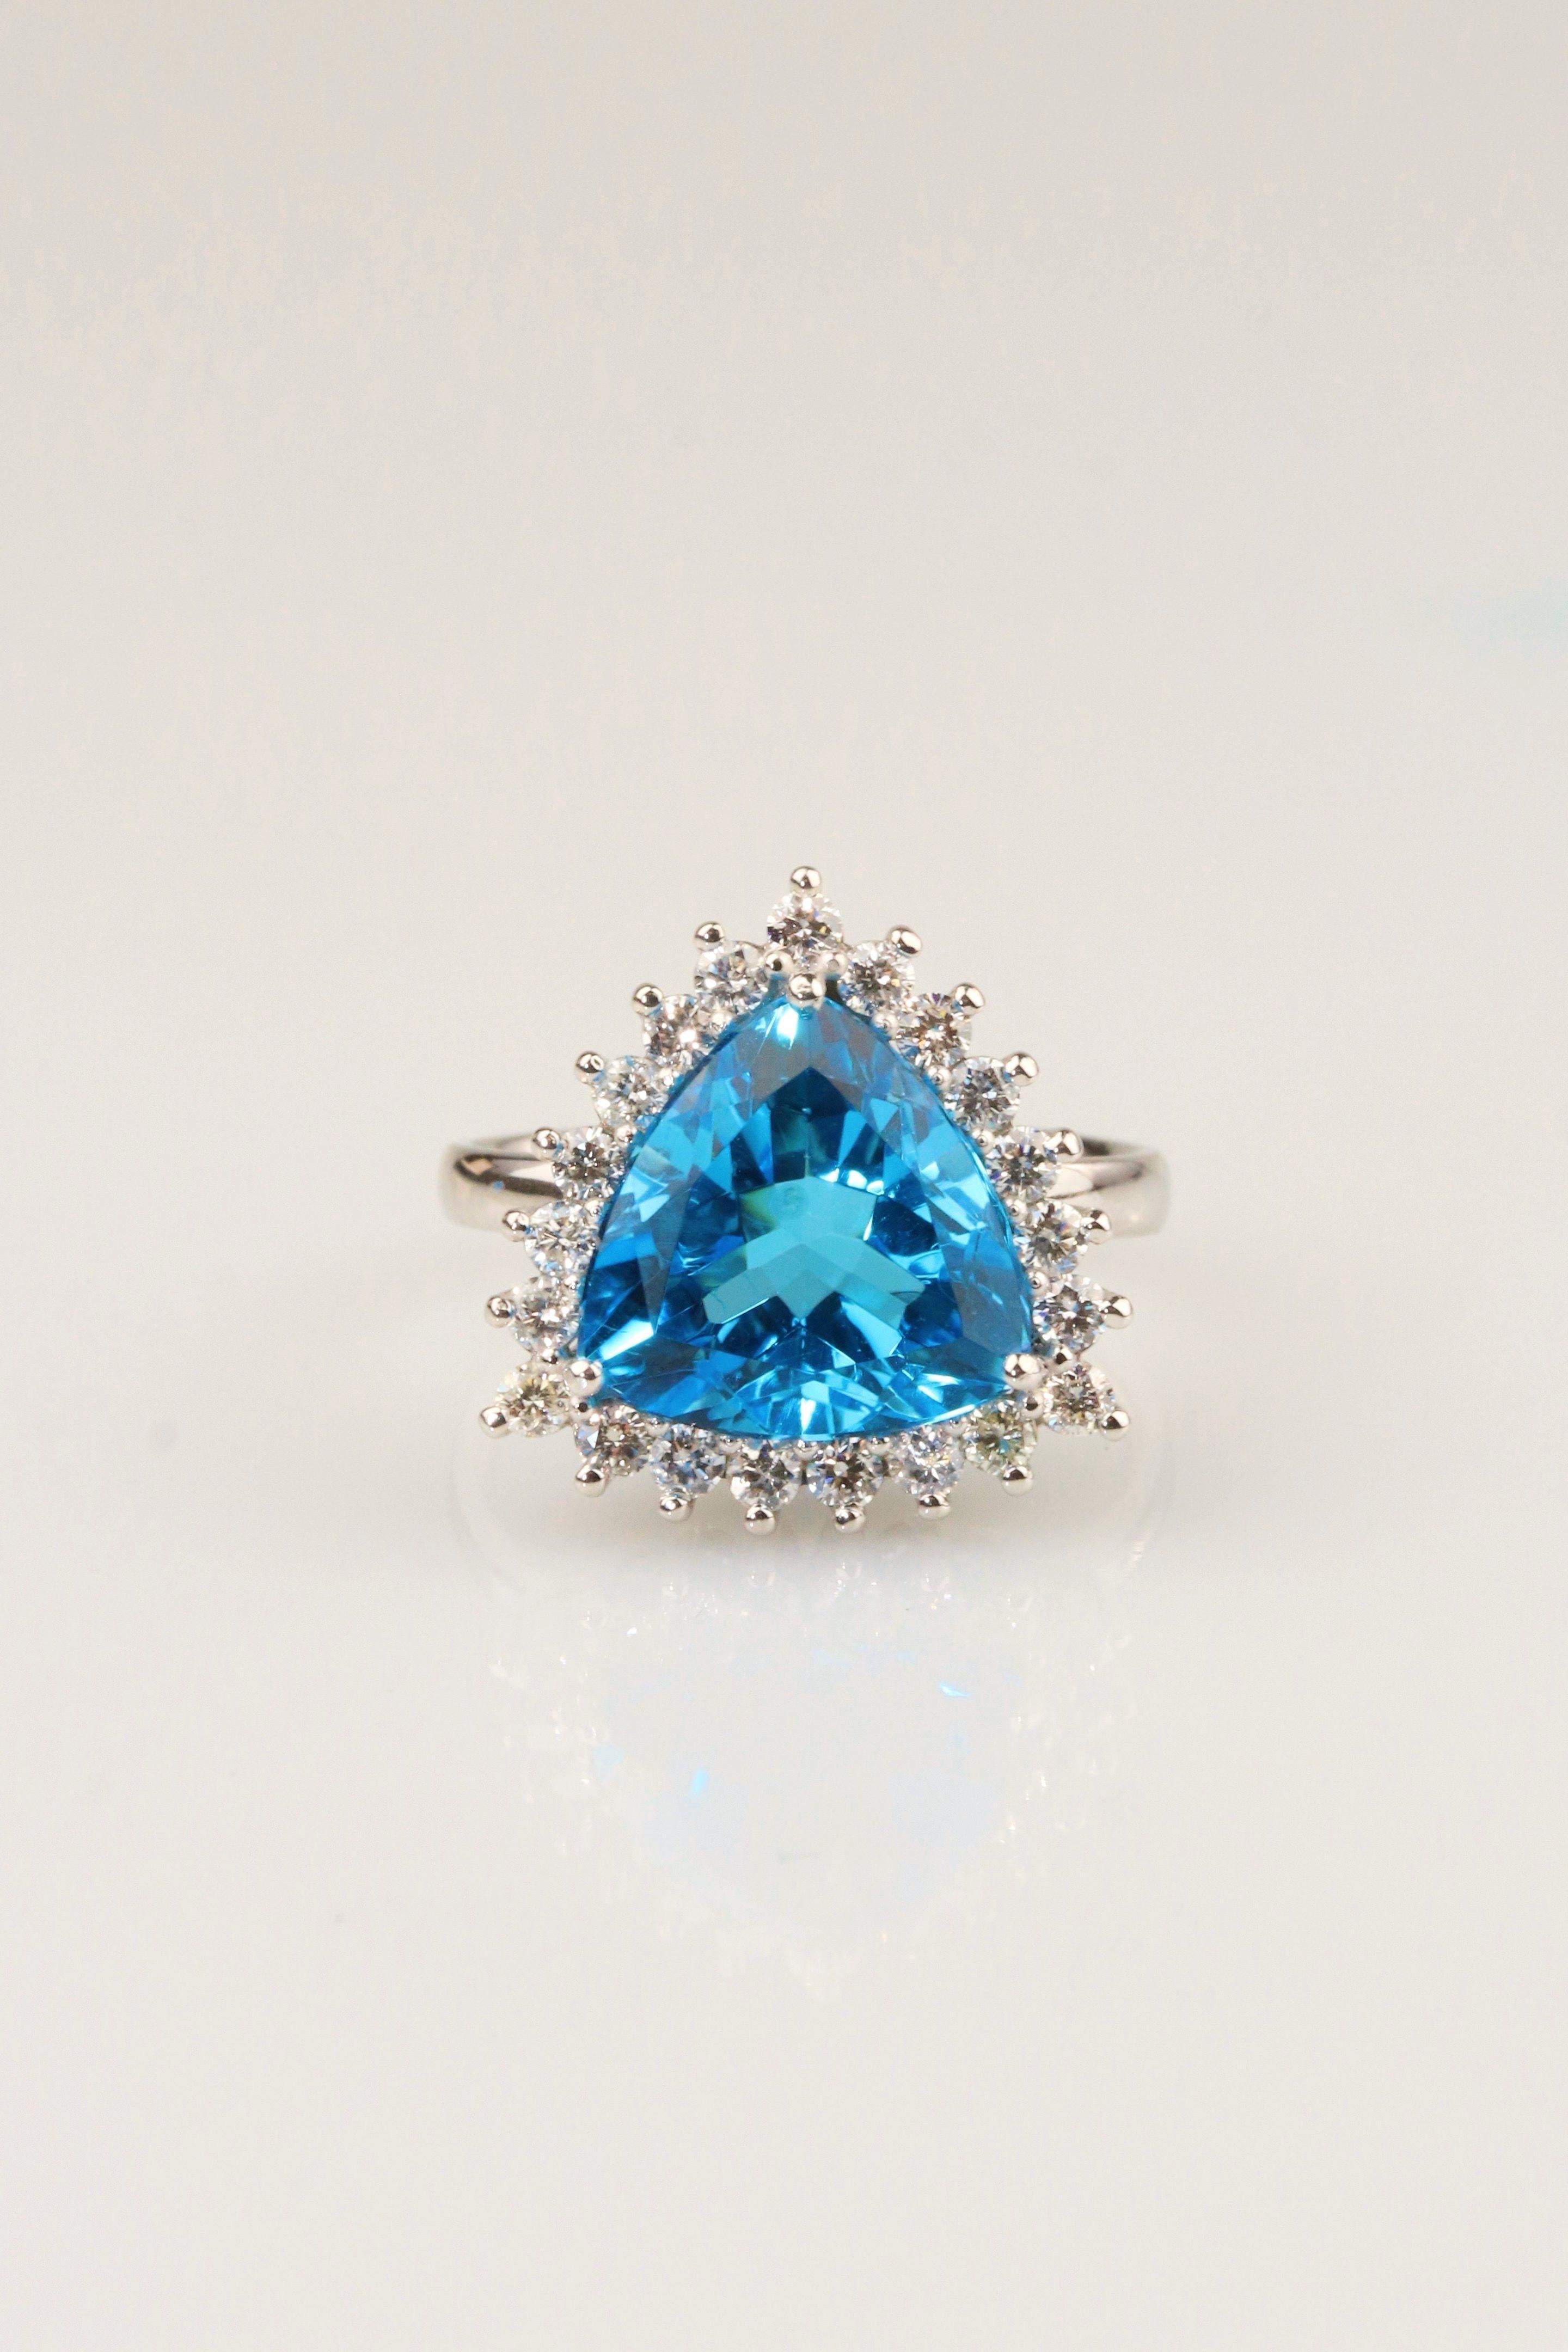 Swiss Topaz & Diamond Ring - 18K Solid Gold - Large Size  In New Condition For Sale In Markham, CA